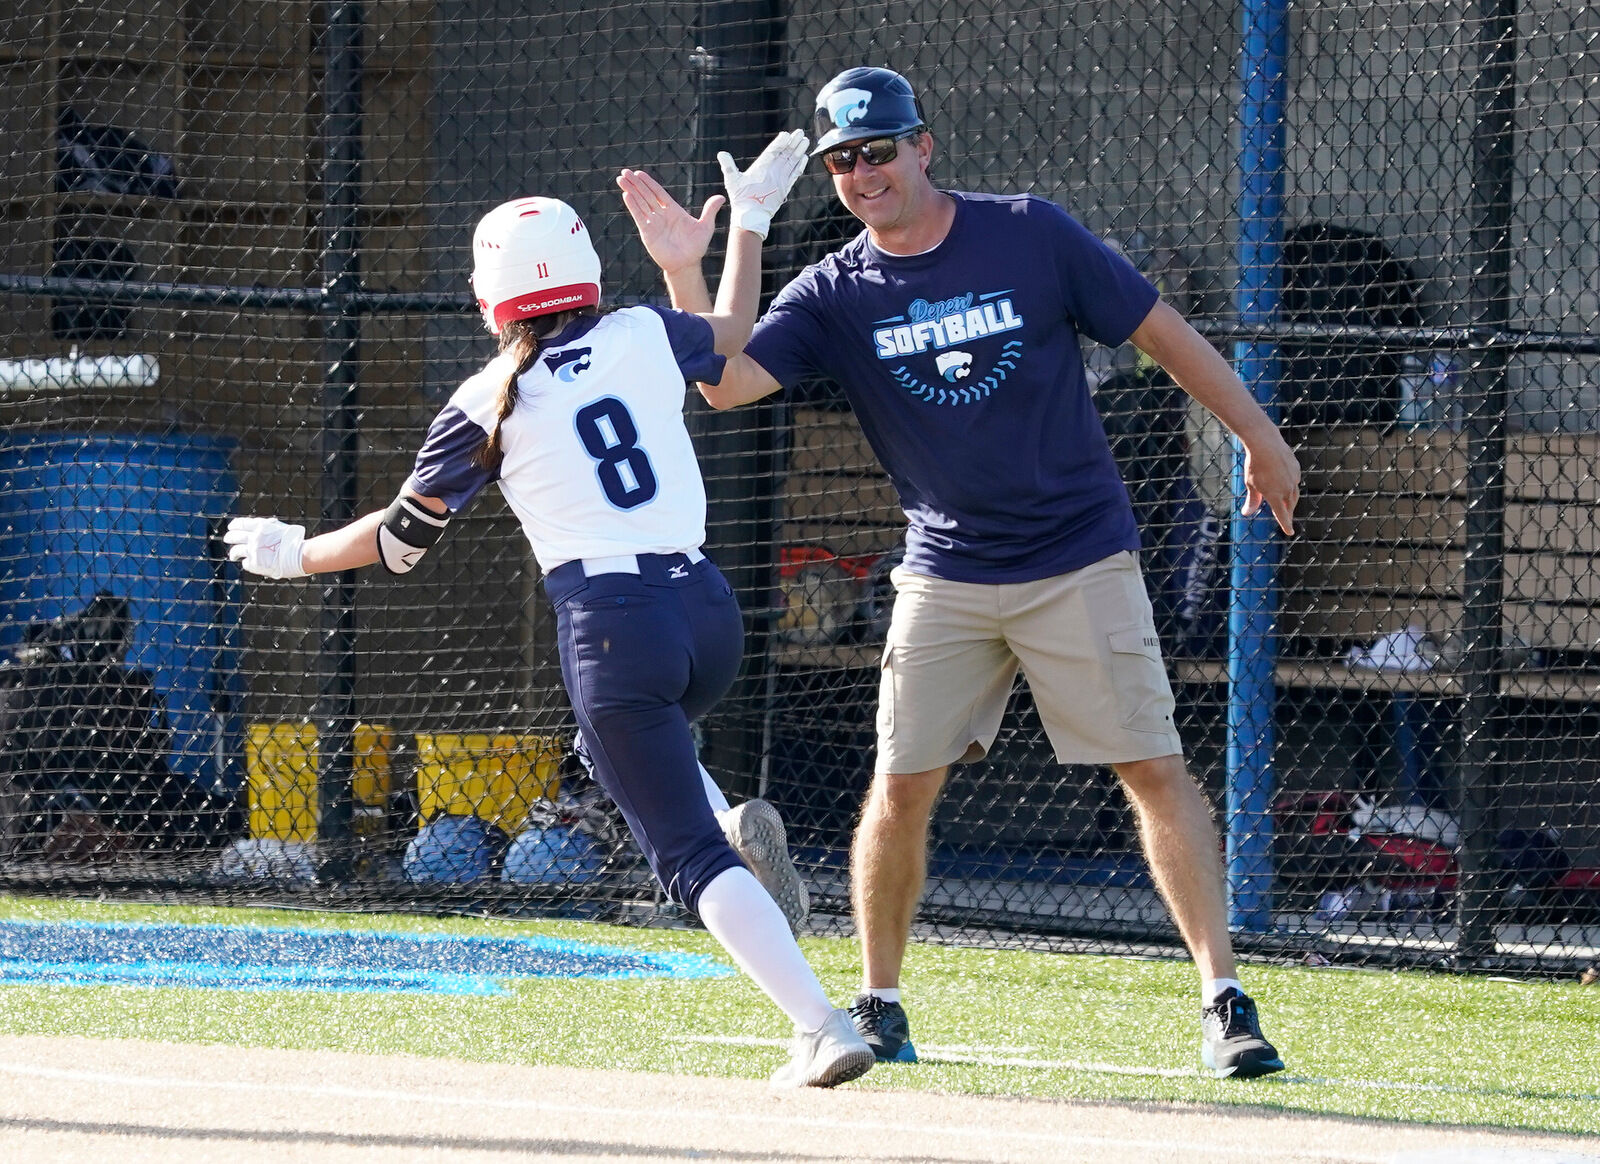 Depew softball focused on returning to state semifinals